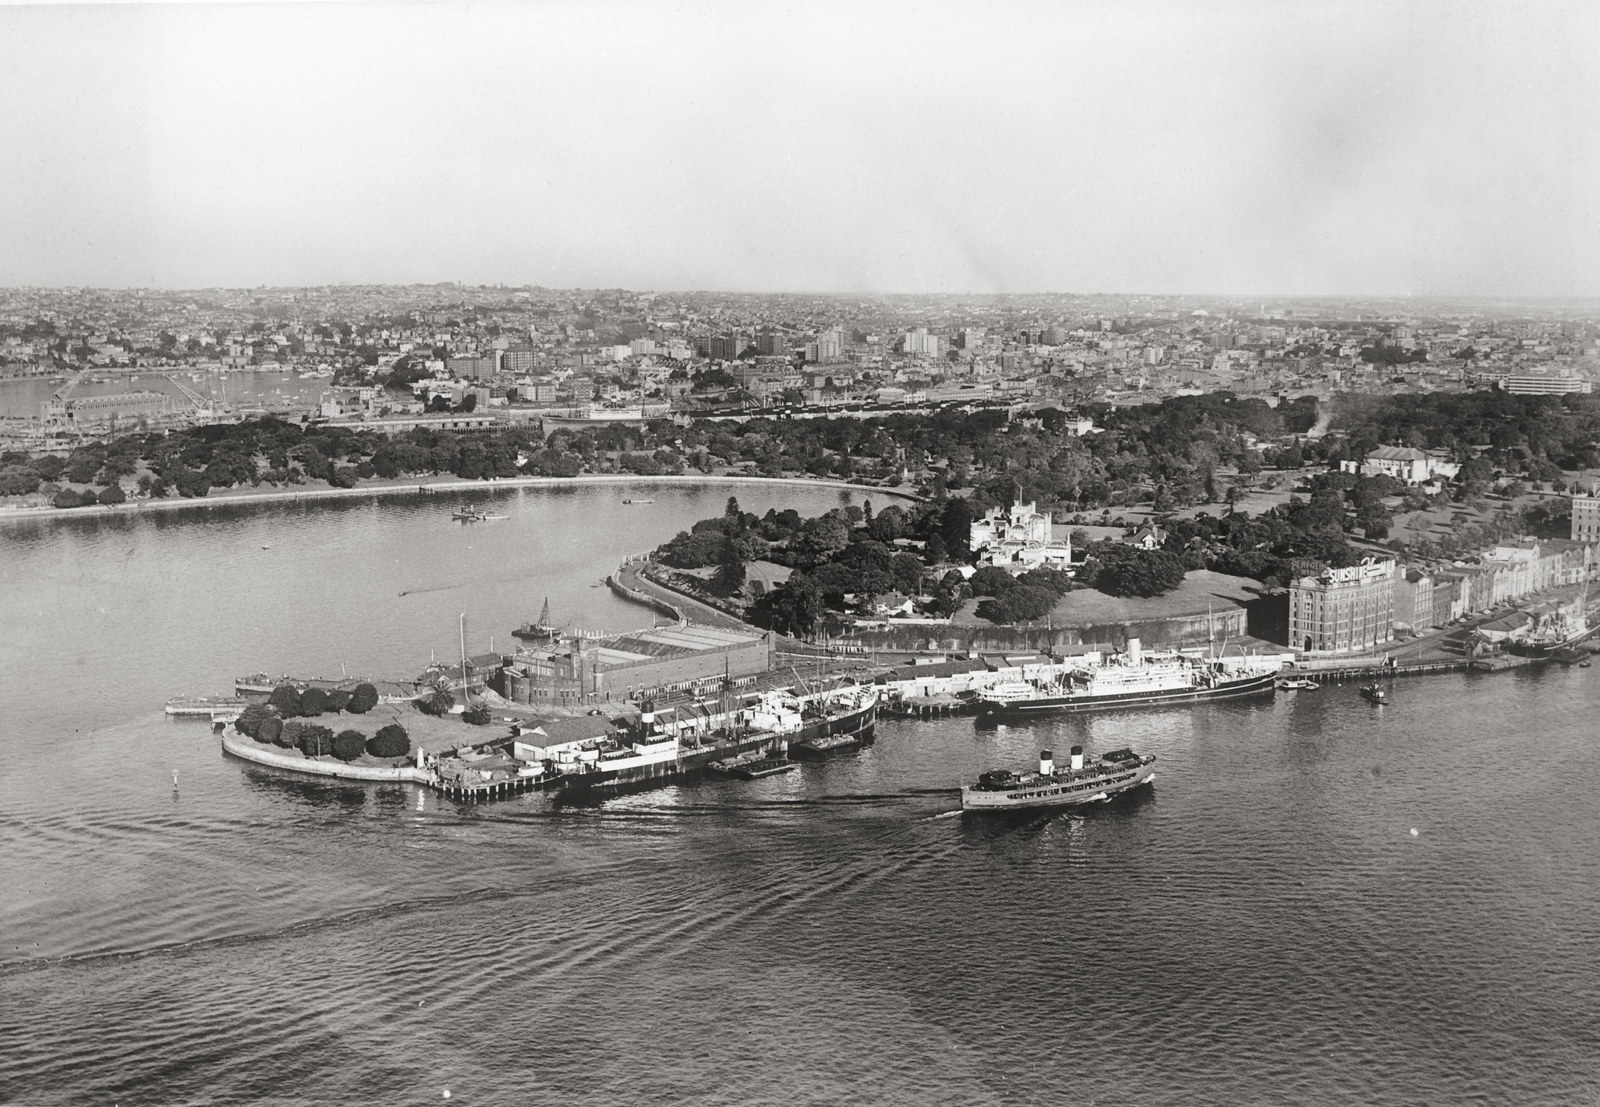 Aerial view of Fort Macquarie Tram Depot at Circular Quay, May 1948 / Photographer unknown / MUSEUMS OF HISTORY NSW, STATE ARCHIVES COLLECTION NRS-17420-2-49-2011/7